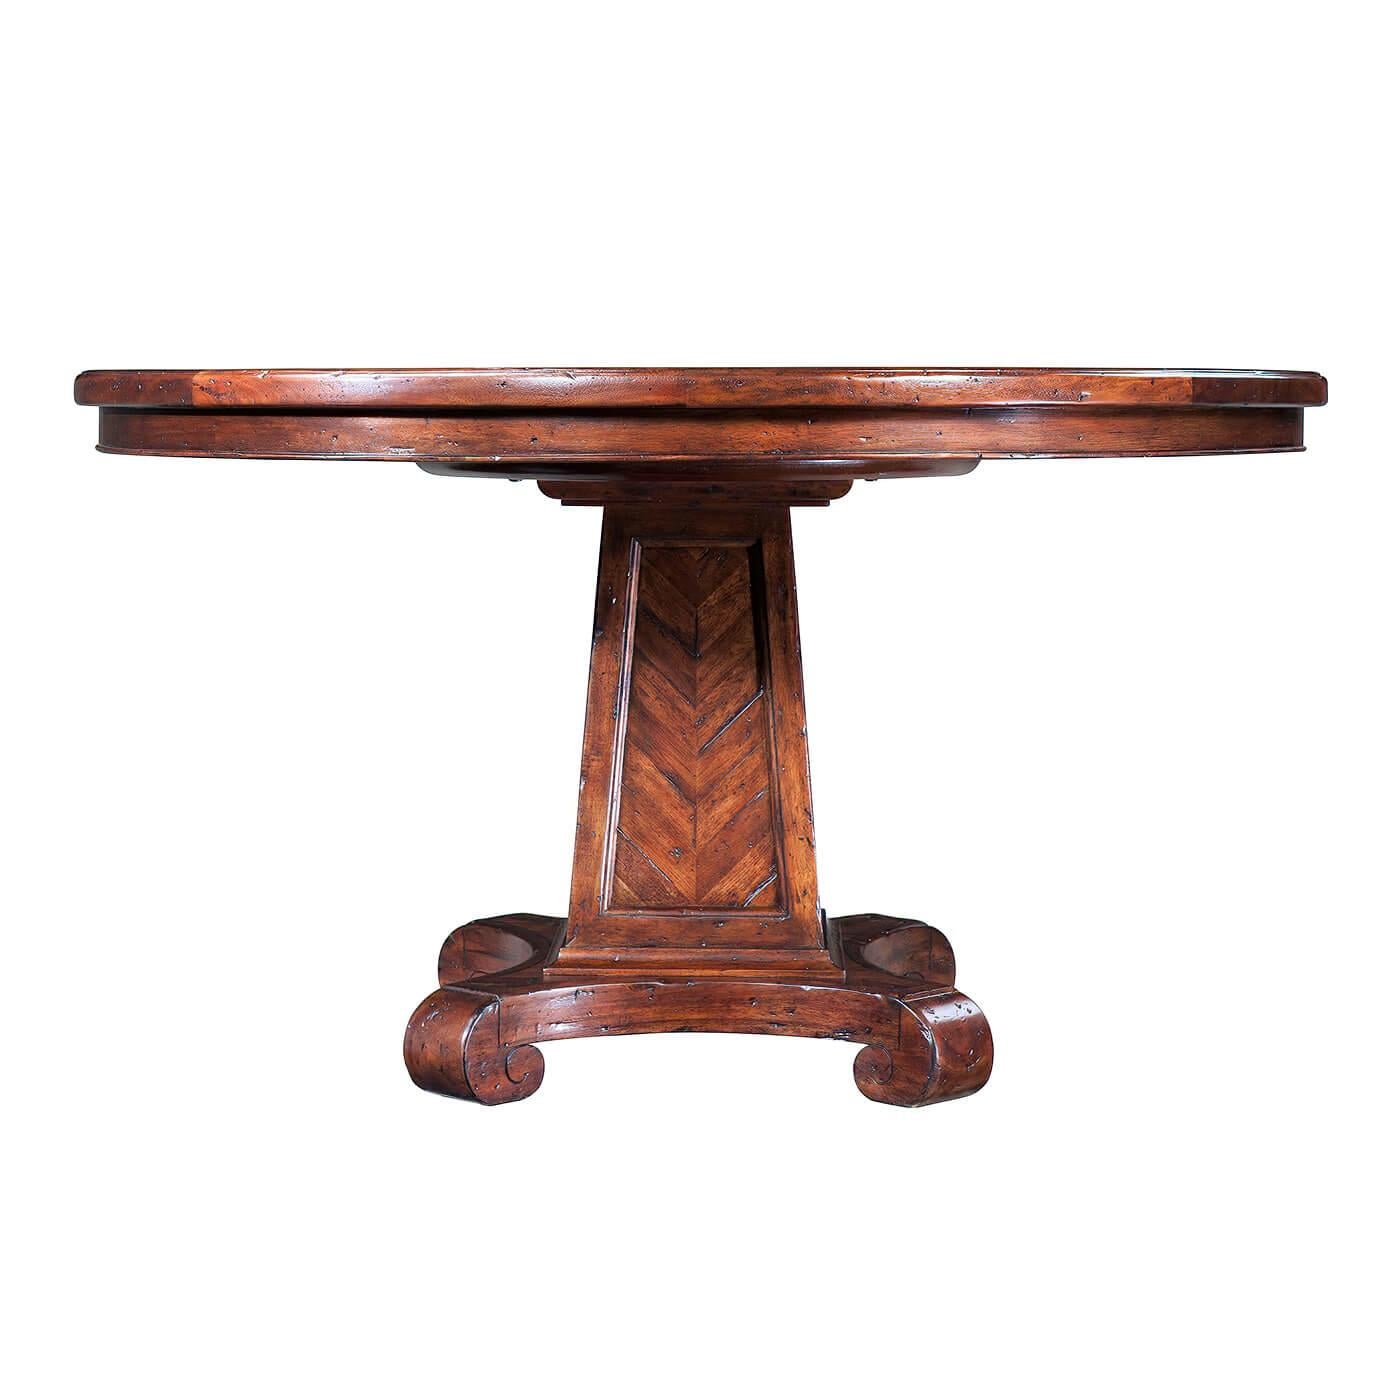 An antiqued wood dining table, the planked circular molded edge top with a stellar parquetry medallion above a chevron parquetry tapering column, on a quatrefoil base with under scroll feet. Inspired by a Regency original.

Dimensions: 54